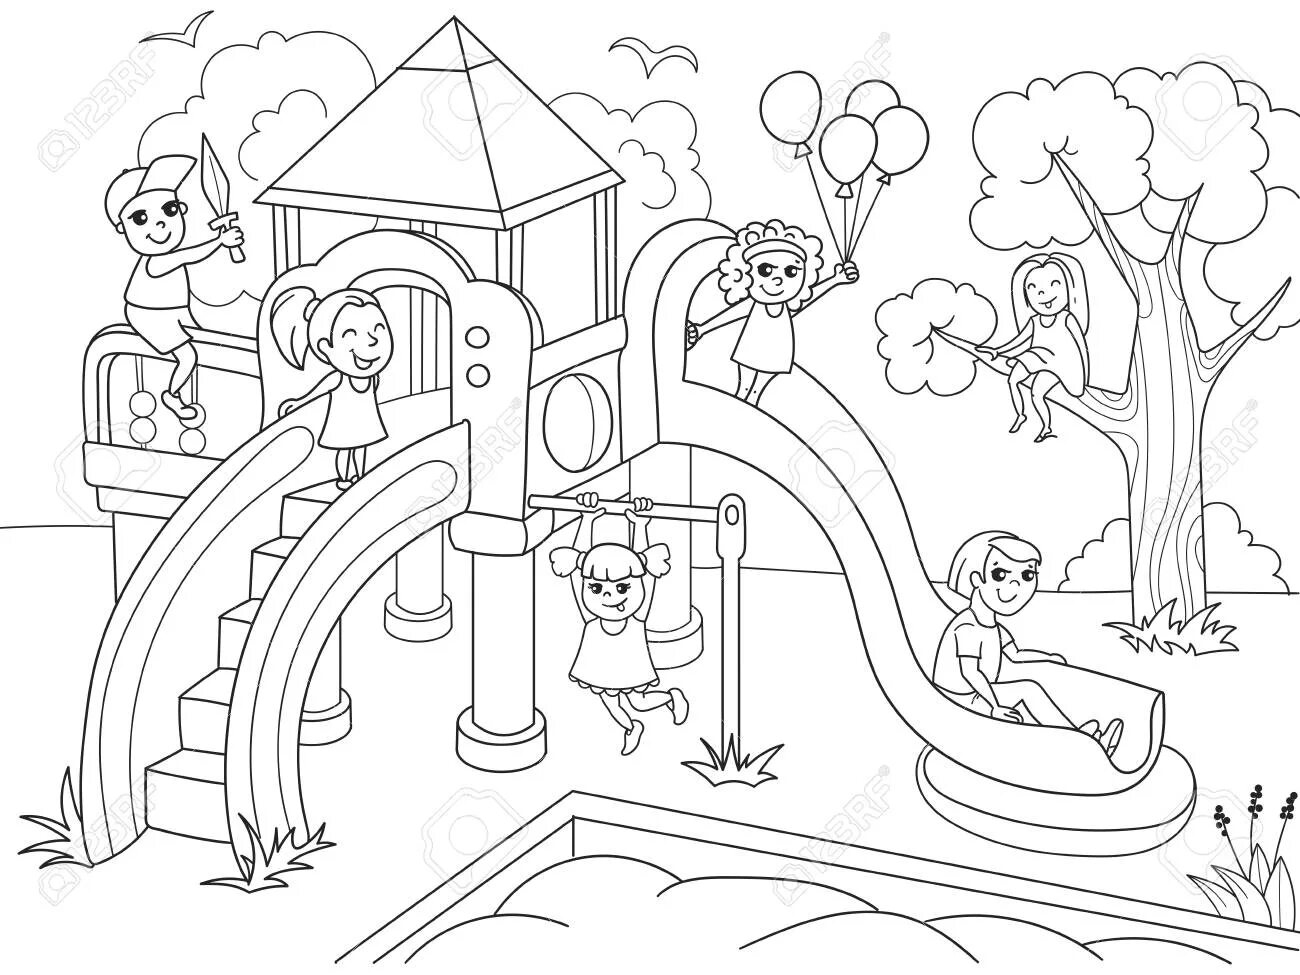 Colorful-nice coloring yard for children